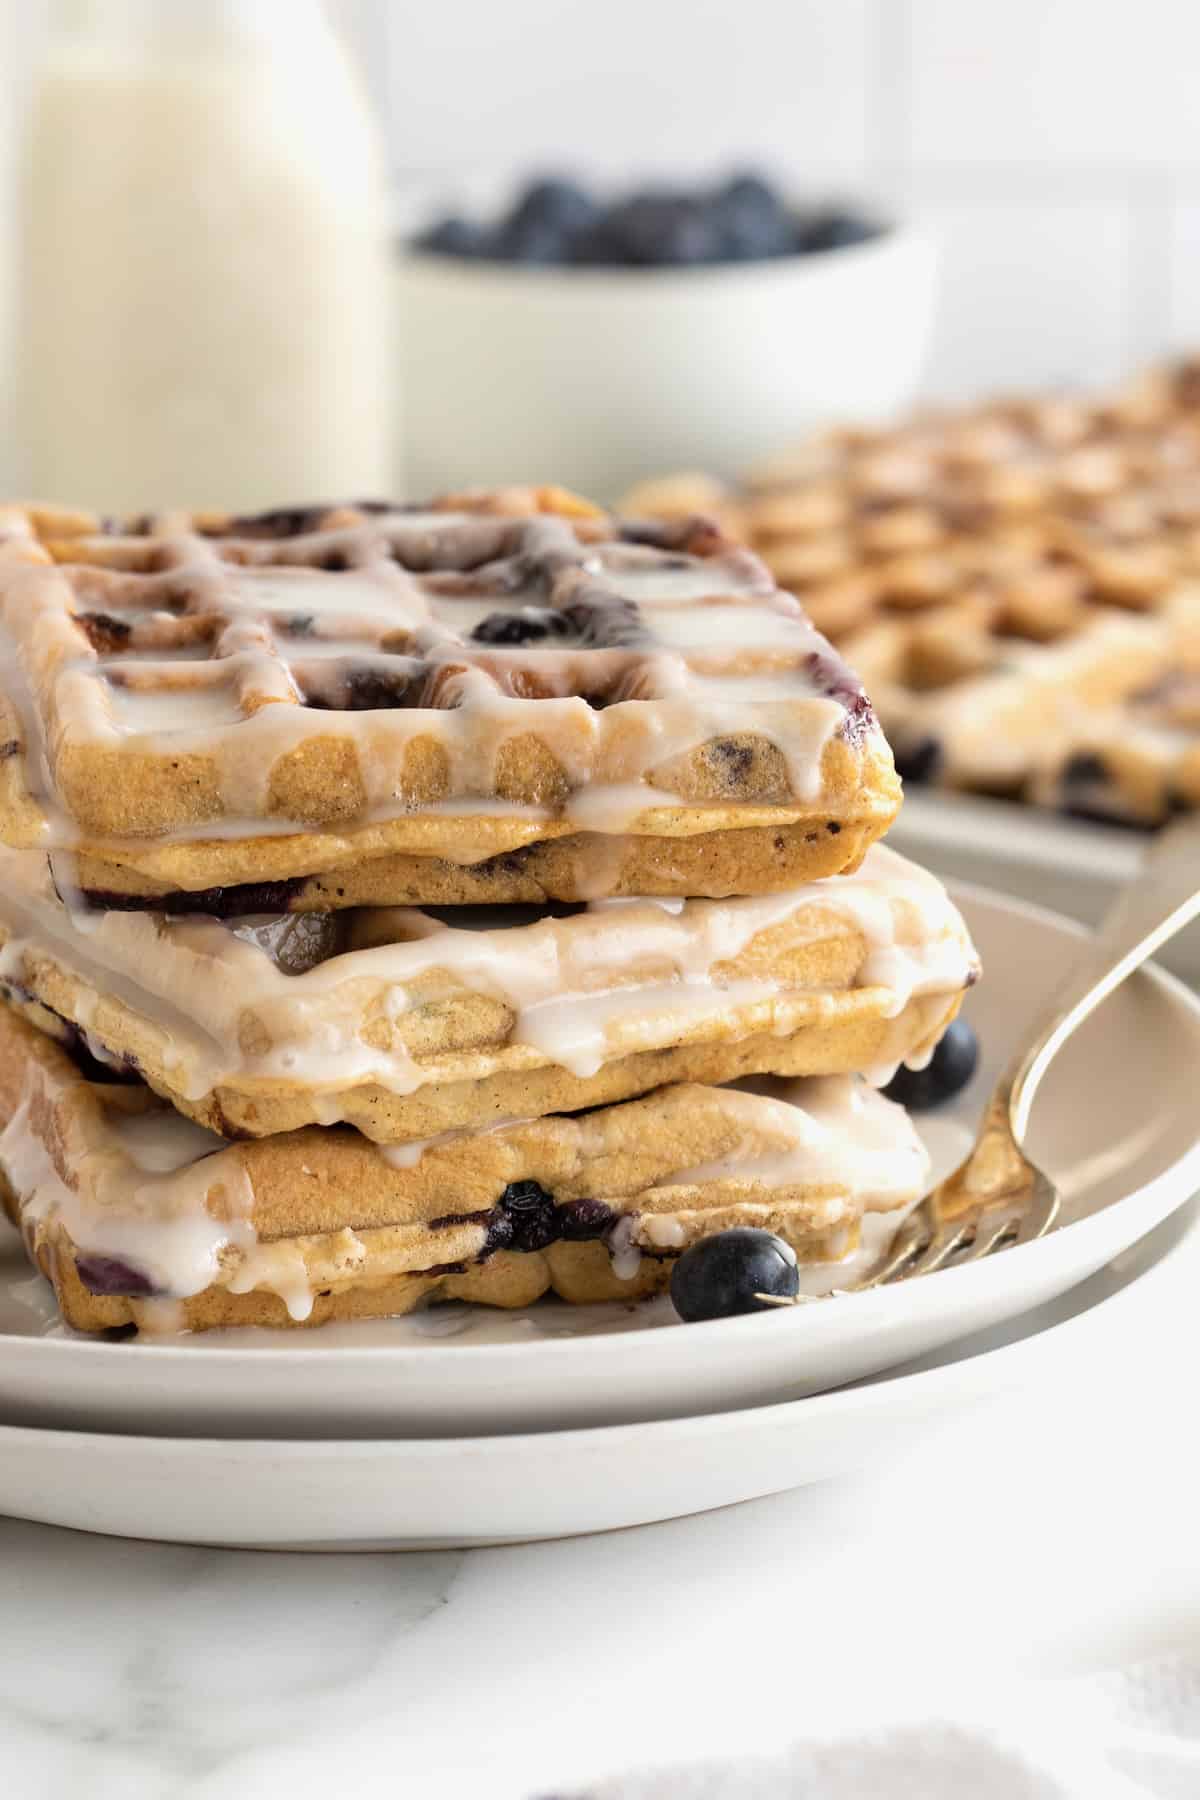 Three glazed blueberry waffles stacked on a small white plate. There is a fork resting on the plate.